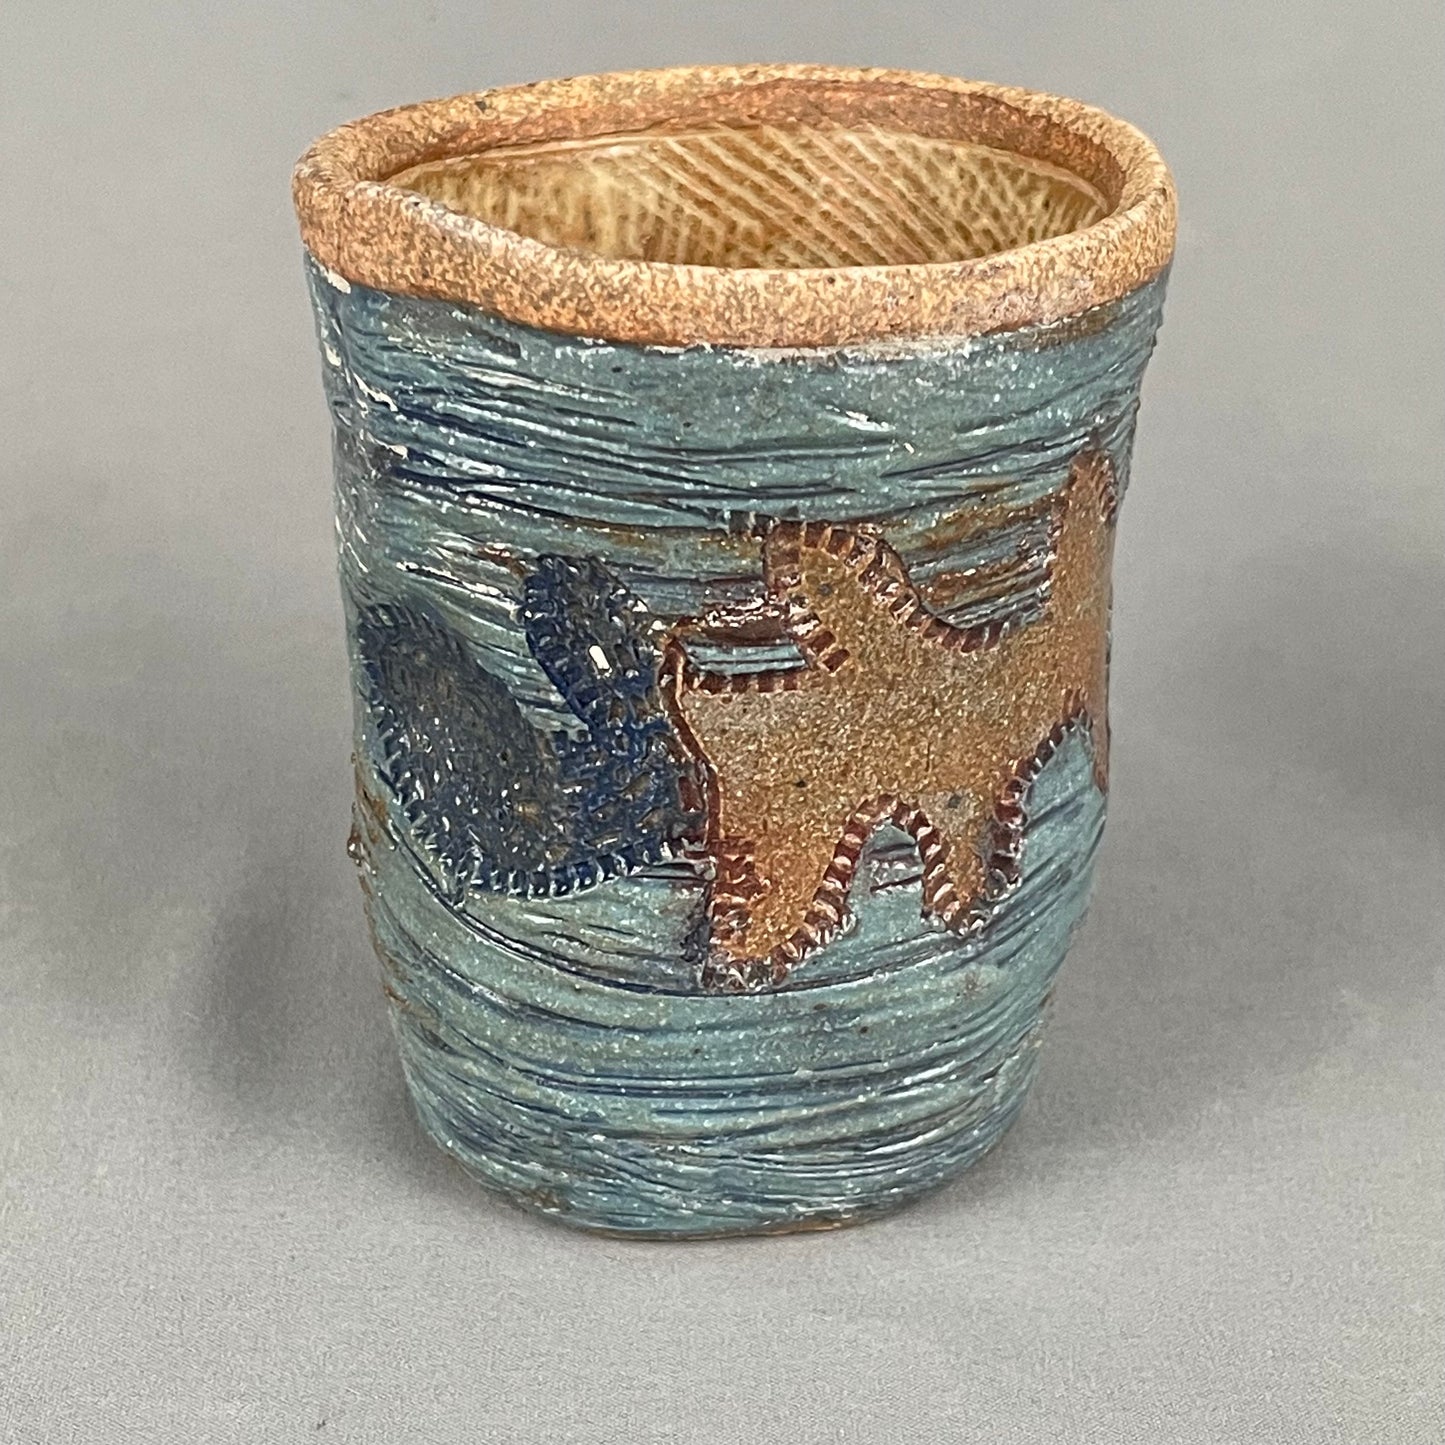 Rustic Cup #2